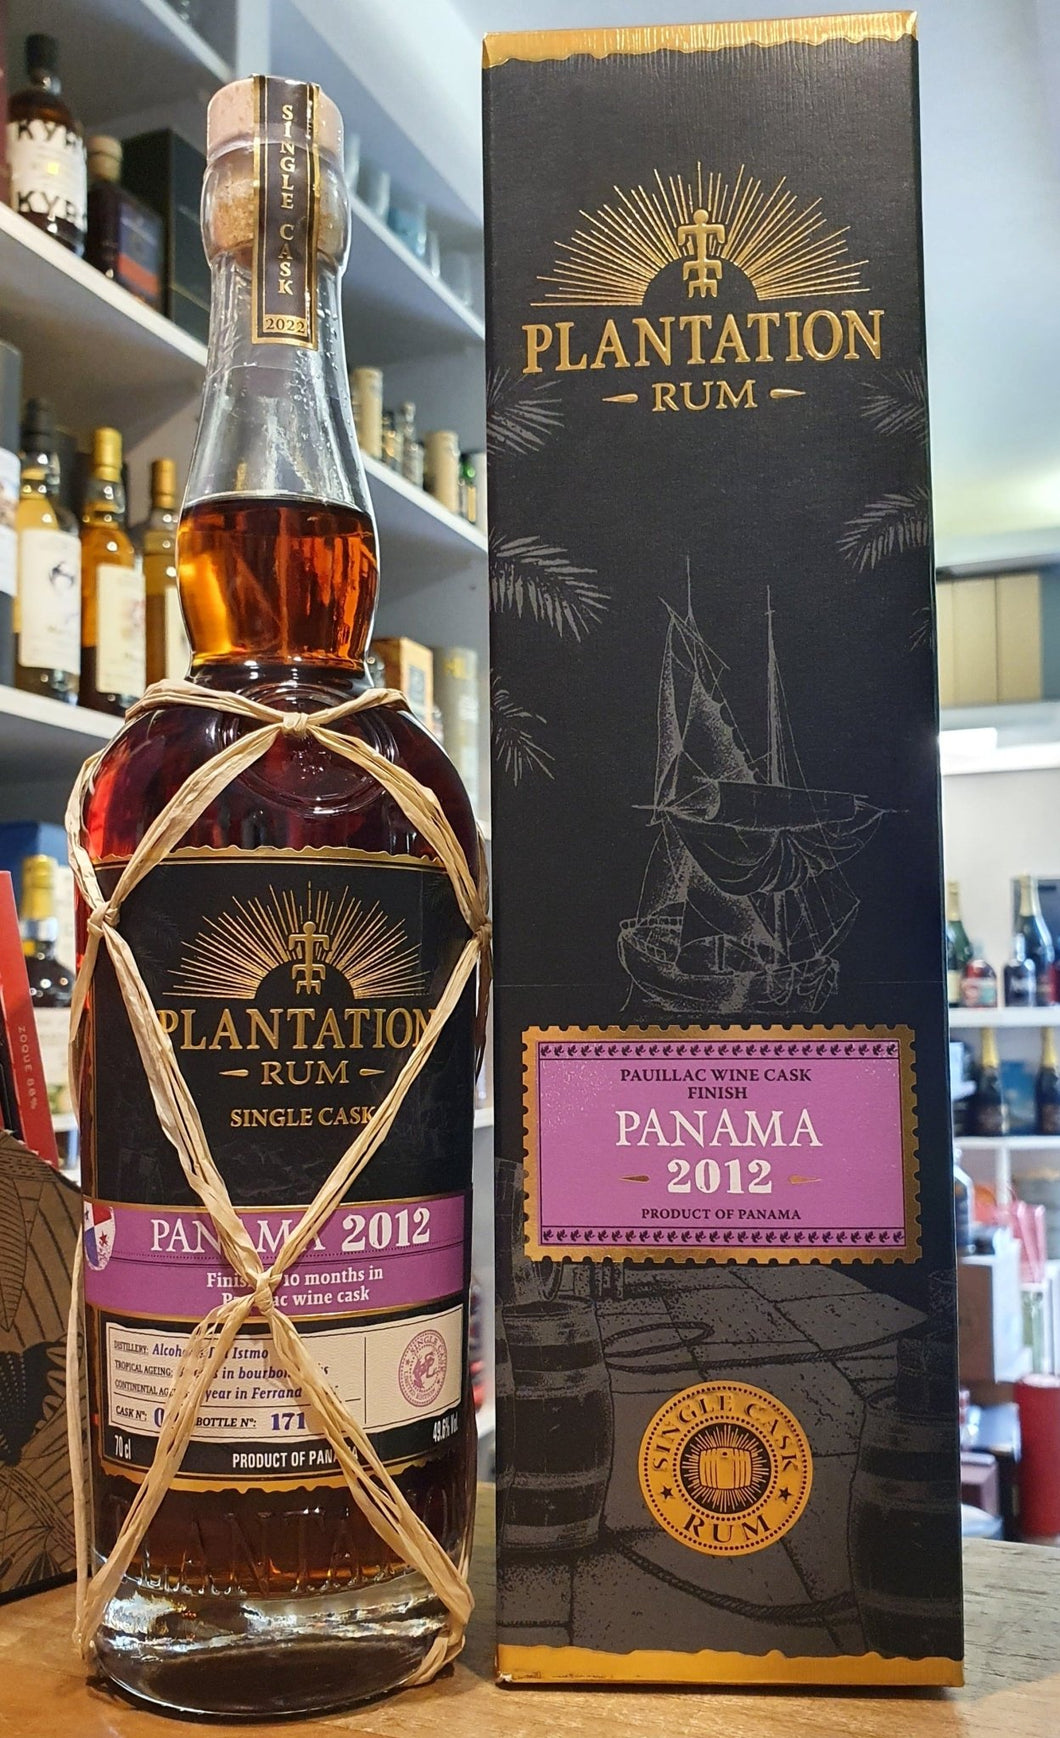 Plantation Panama 2012 2022 pauillac cask XO 0,7l 49,6% vol. single cask Rum bsc exclusiv für Deutschland BSC distiller: Alcoholes del Istmo Molasses  limitiert auf 9 Fässer Esters: 30 VC: 50 Dosage: 12  Nase: Intense and complex, flowery on iris and rose, fruity on blackcurrant and dark cherry, with woody and smoky cedar frankincense hints tobacco, coffee vanilla.  Sweet blackberry pie dark plum minerality pencil lead and velvety tannins, develops bigarreau cherry, toasted bread violet balsamic peppery 